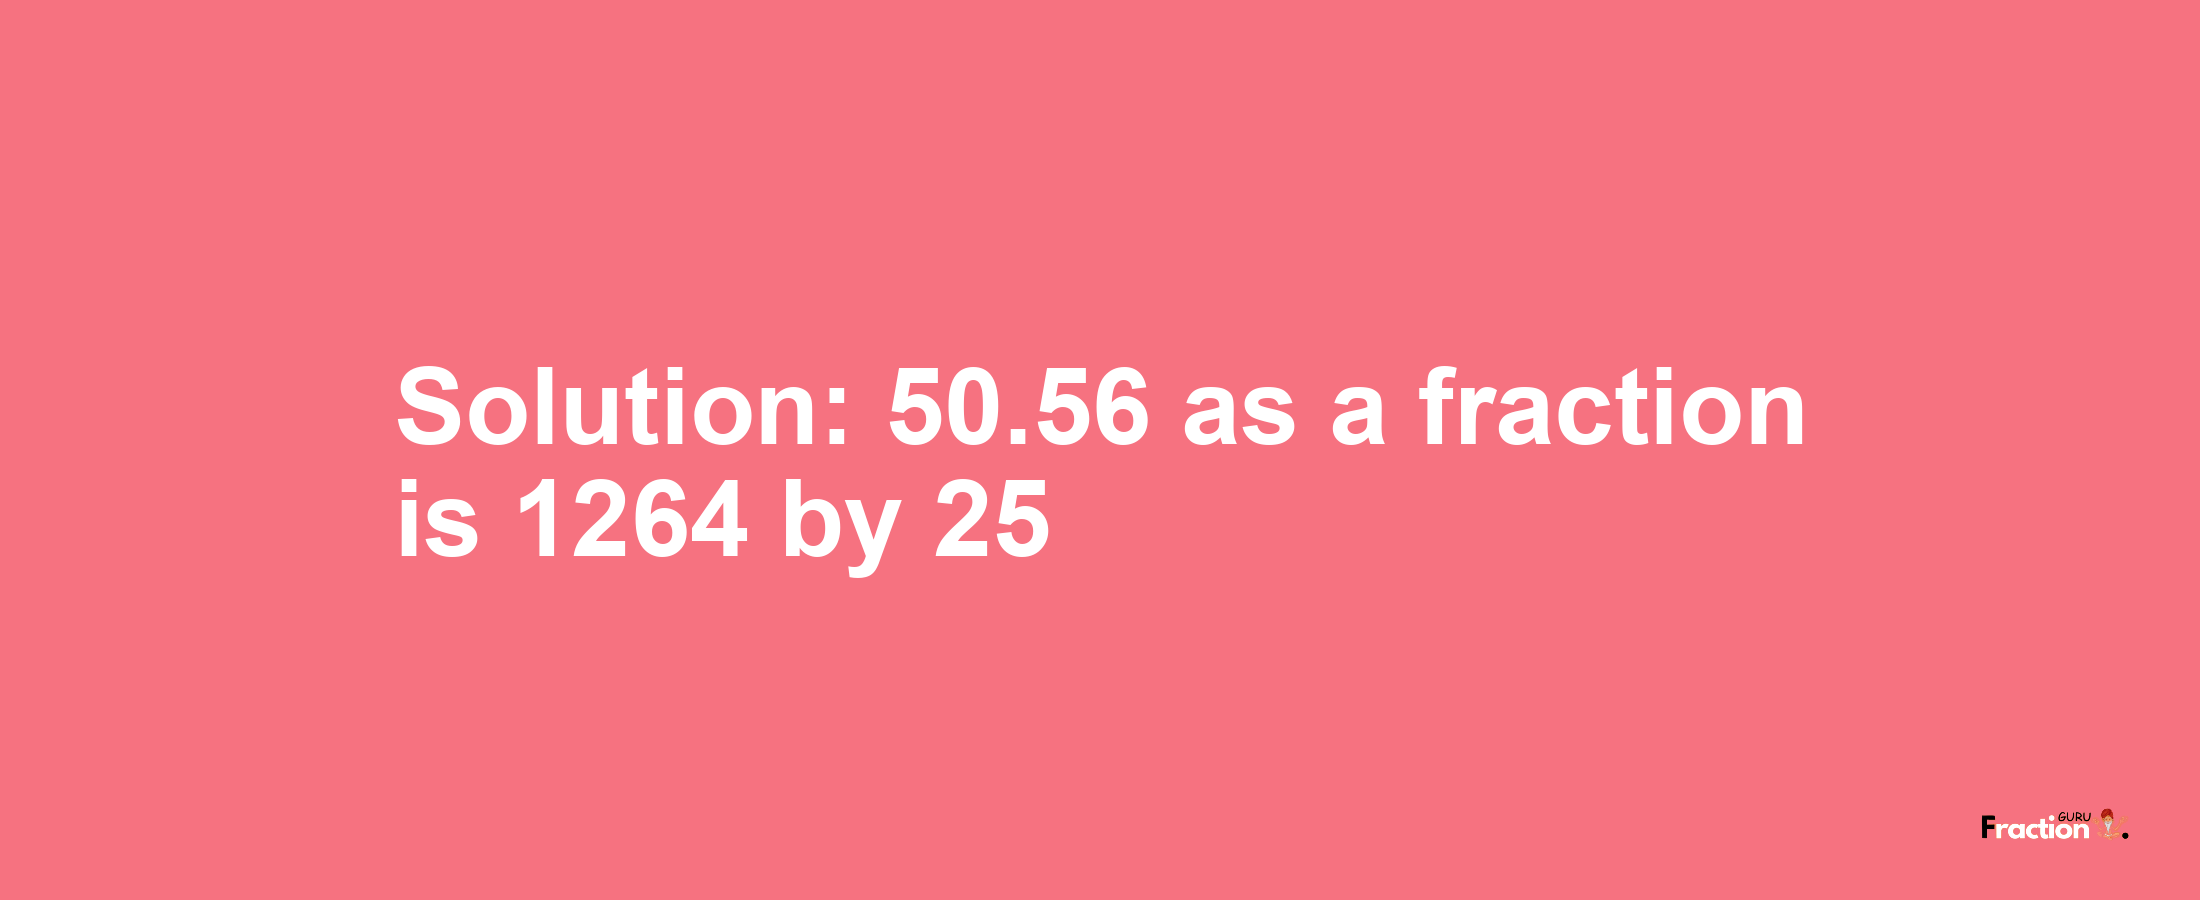 Solution:50.56 as a fraction is 1264/25